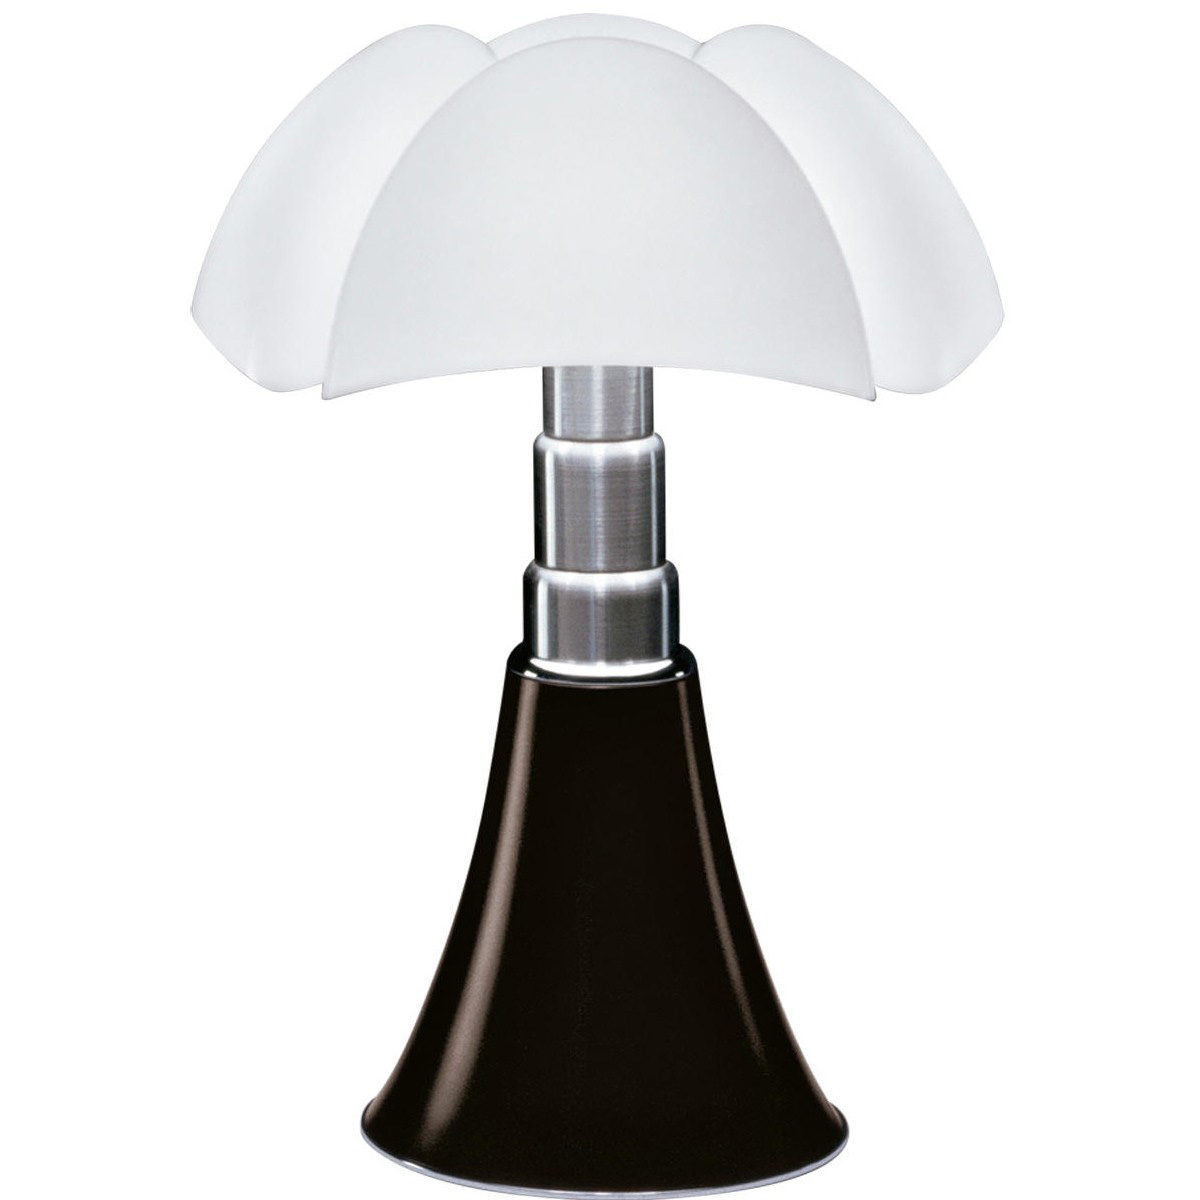 Mammoet Op risico helaas Pipistrello LED Table Lamp by Martinelli Luce | 620/L/1/US/MA | MRN828724